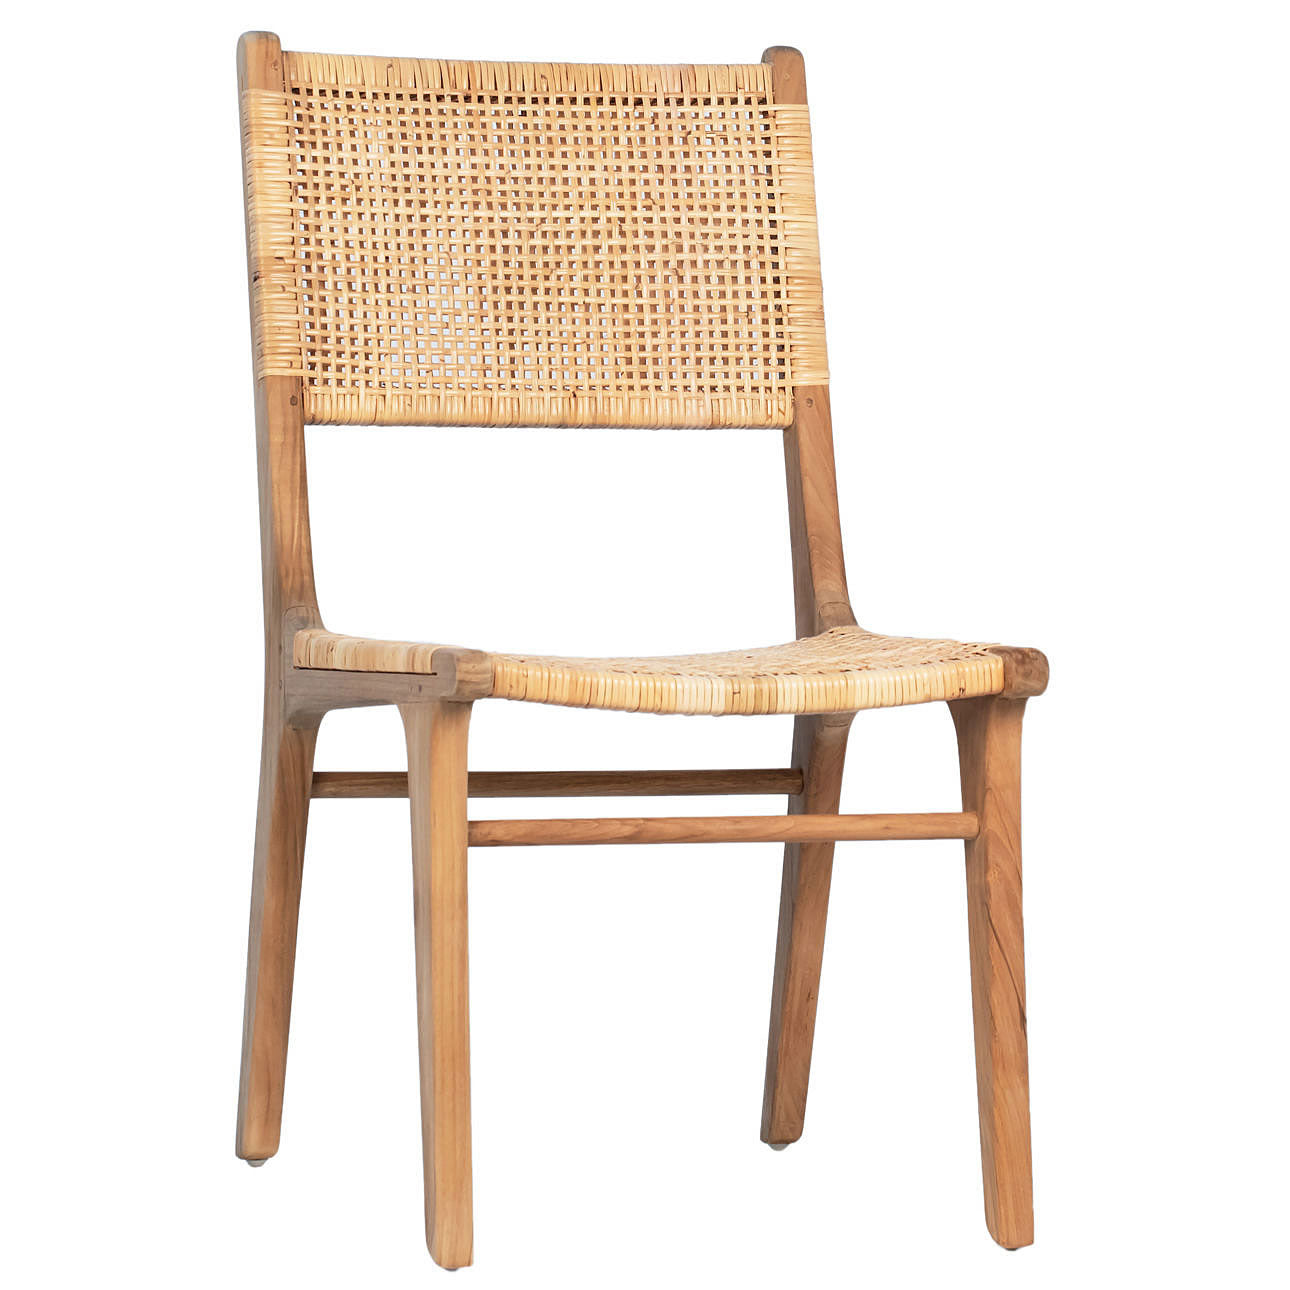 amarillo-french-linen-upholstered-side-chair-in-bisque-and-stone-wash